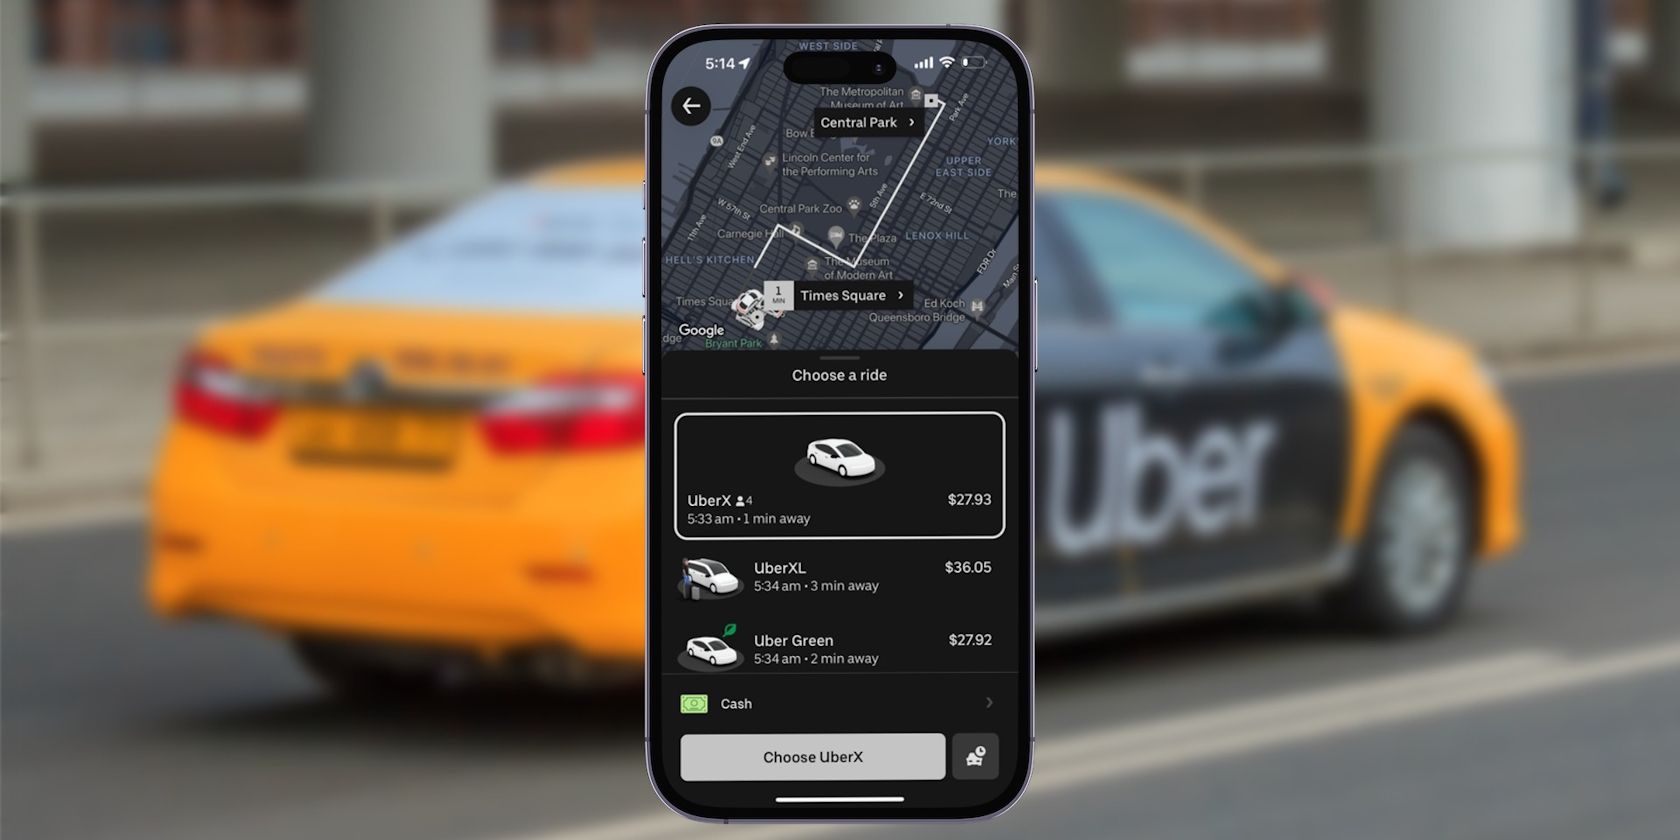 Image showing various Uber ride types appearing on an iPhone